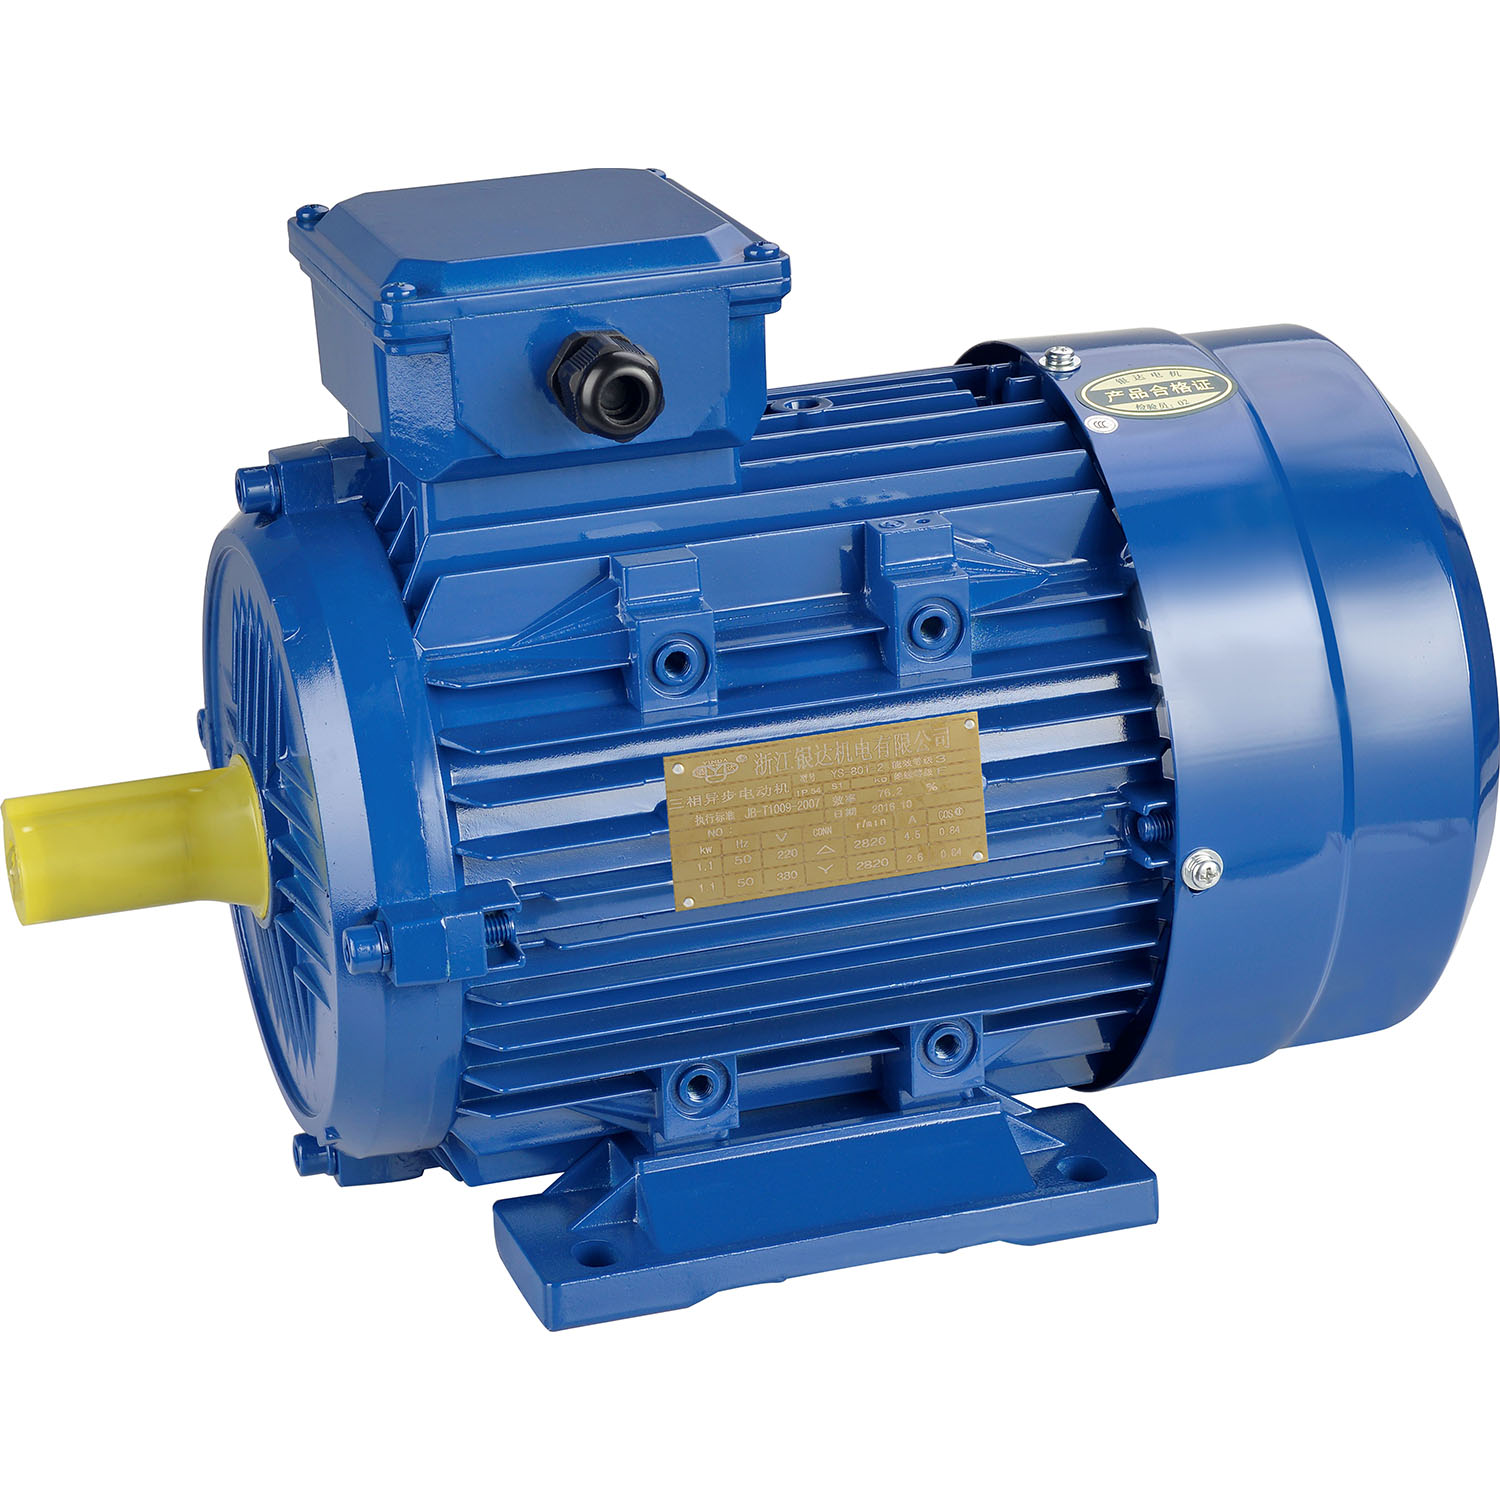 YS-712-6 0.25KW 0.33HP aluminum cylinder series high efficiency three-phase asynchronous motor